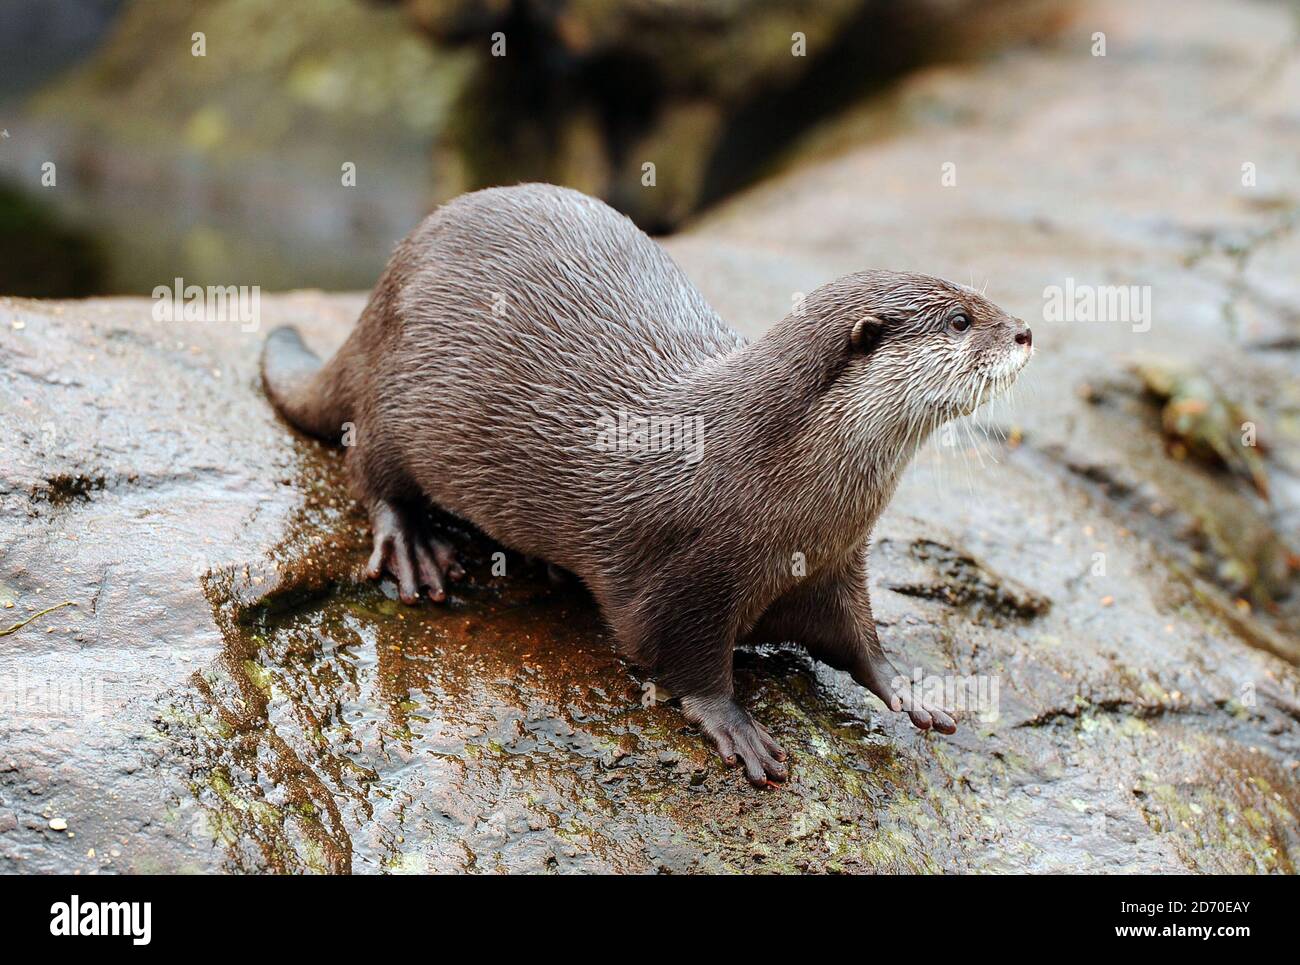 Asian Short-Clawed Otters pictured during London Zoo's annual stock take, a requirement of their zoo license, which takes pace every January. Stock Photo